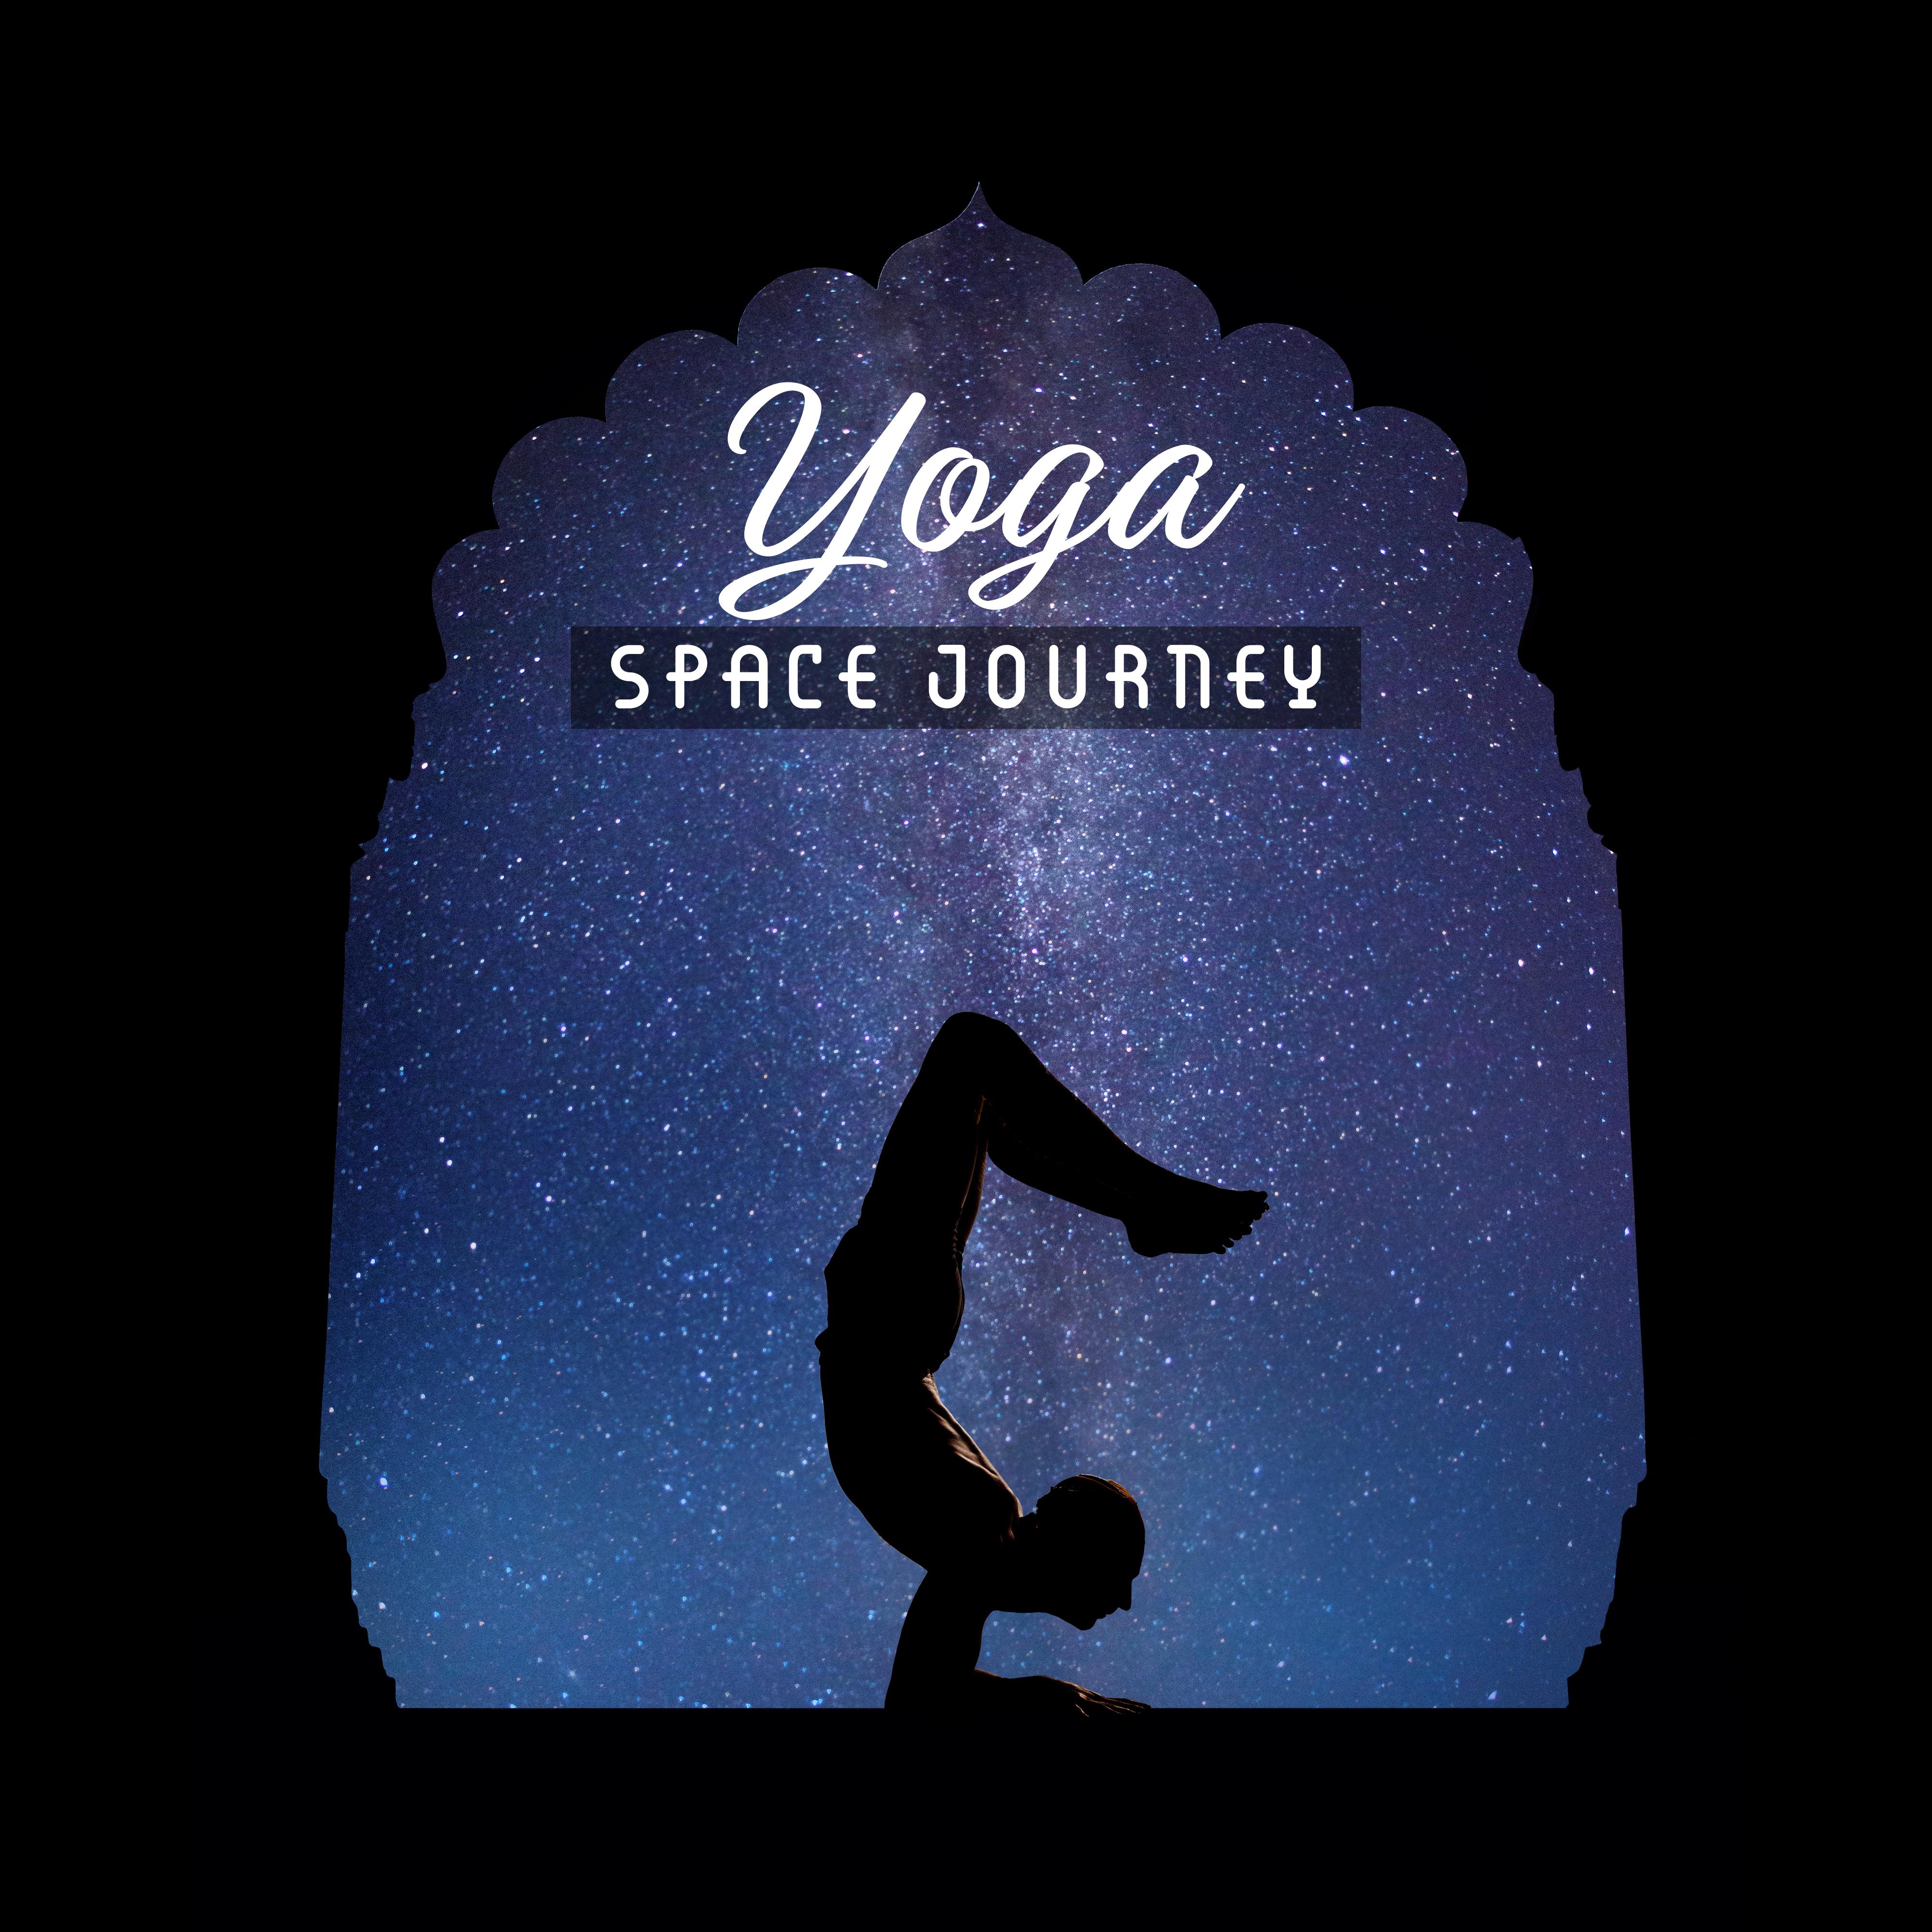 Yoga Space Journey: 2019 New Age Deep Ambient Music for Meditation & Inner Relaxation, Mind Calming Cosmic Sounds, Chakra Healing Songs, Zen, Mantra, Third Eye Opening